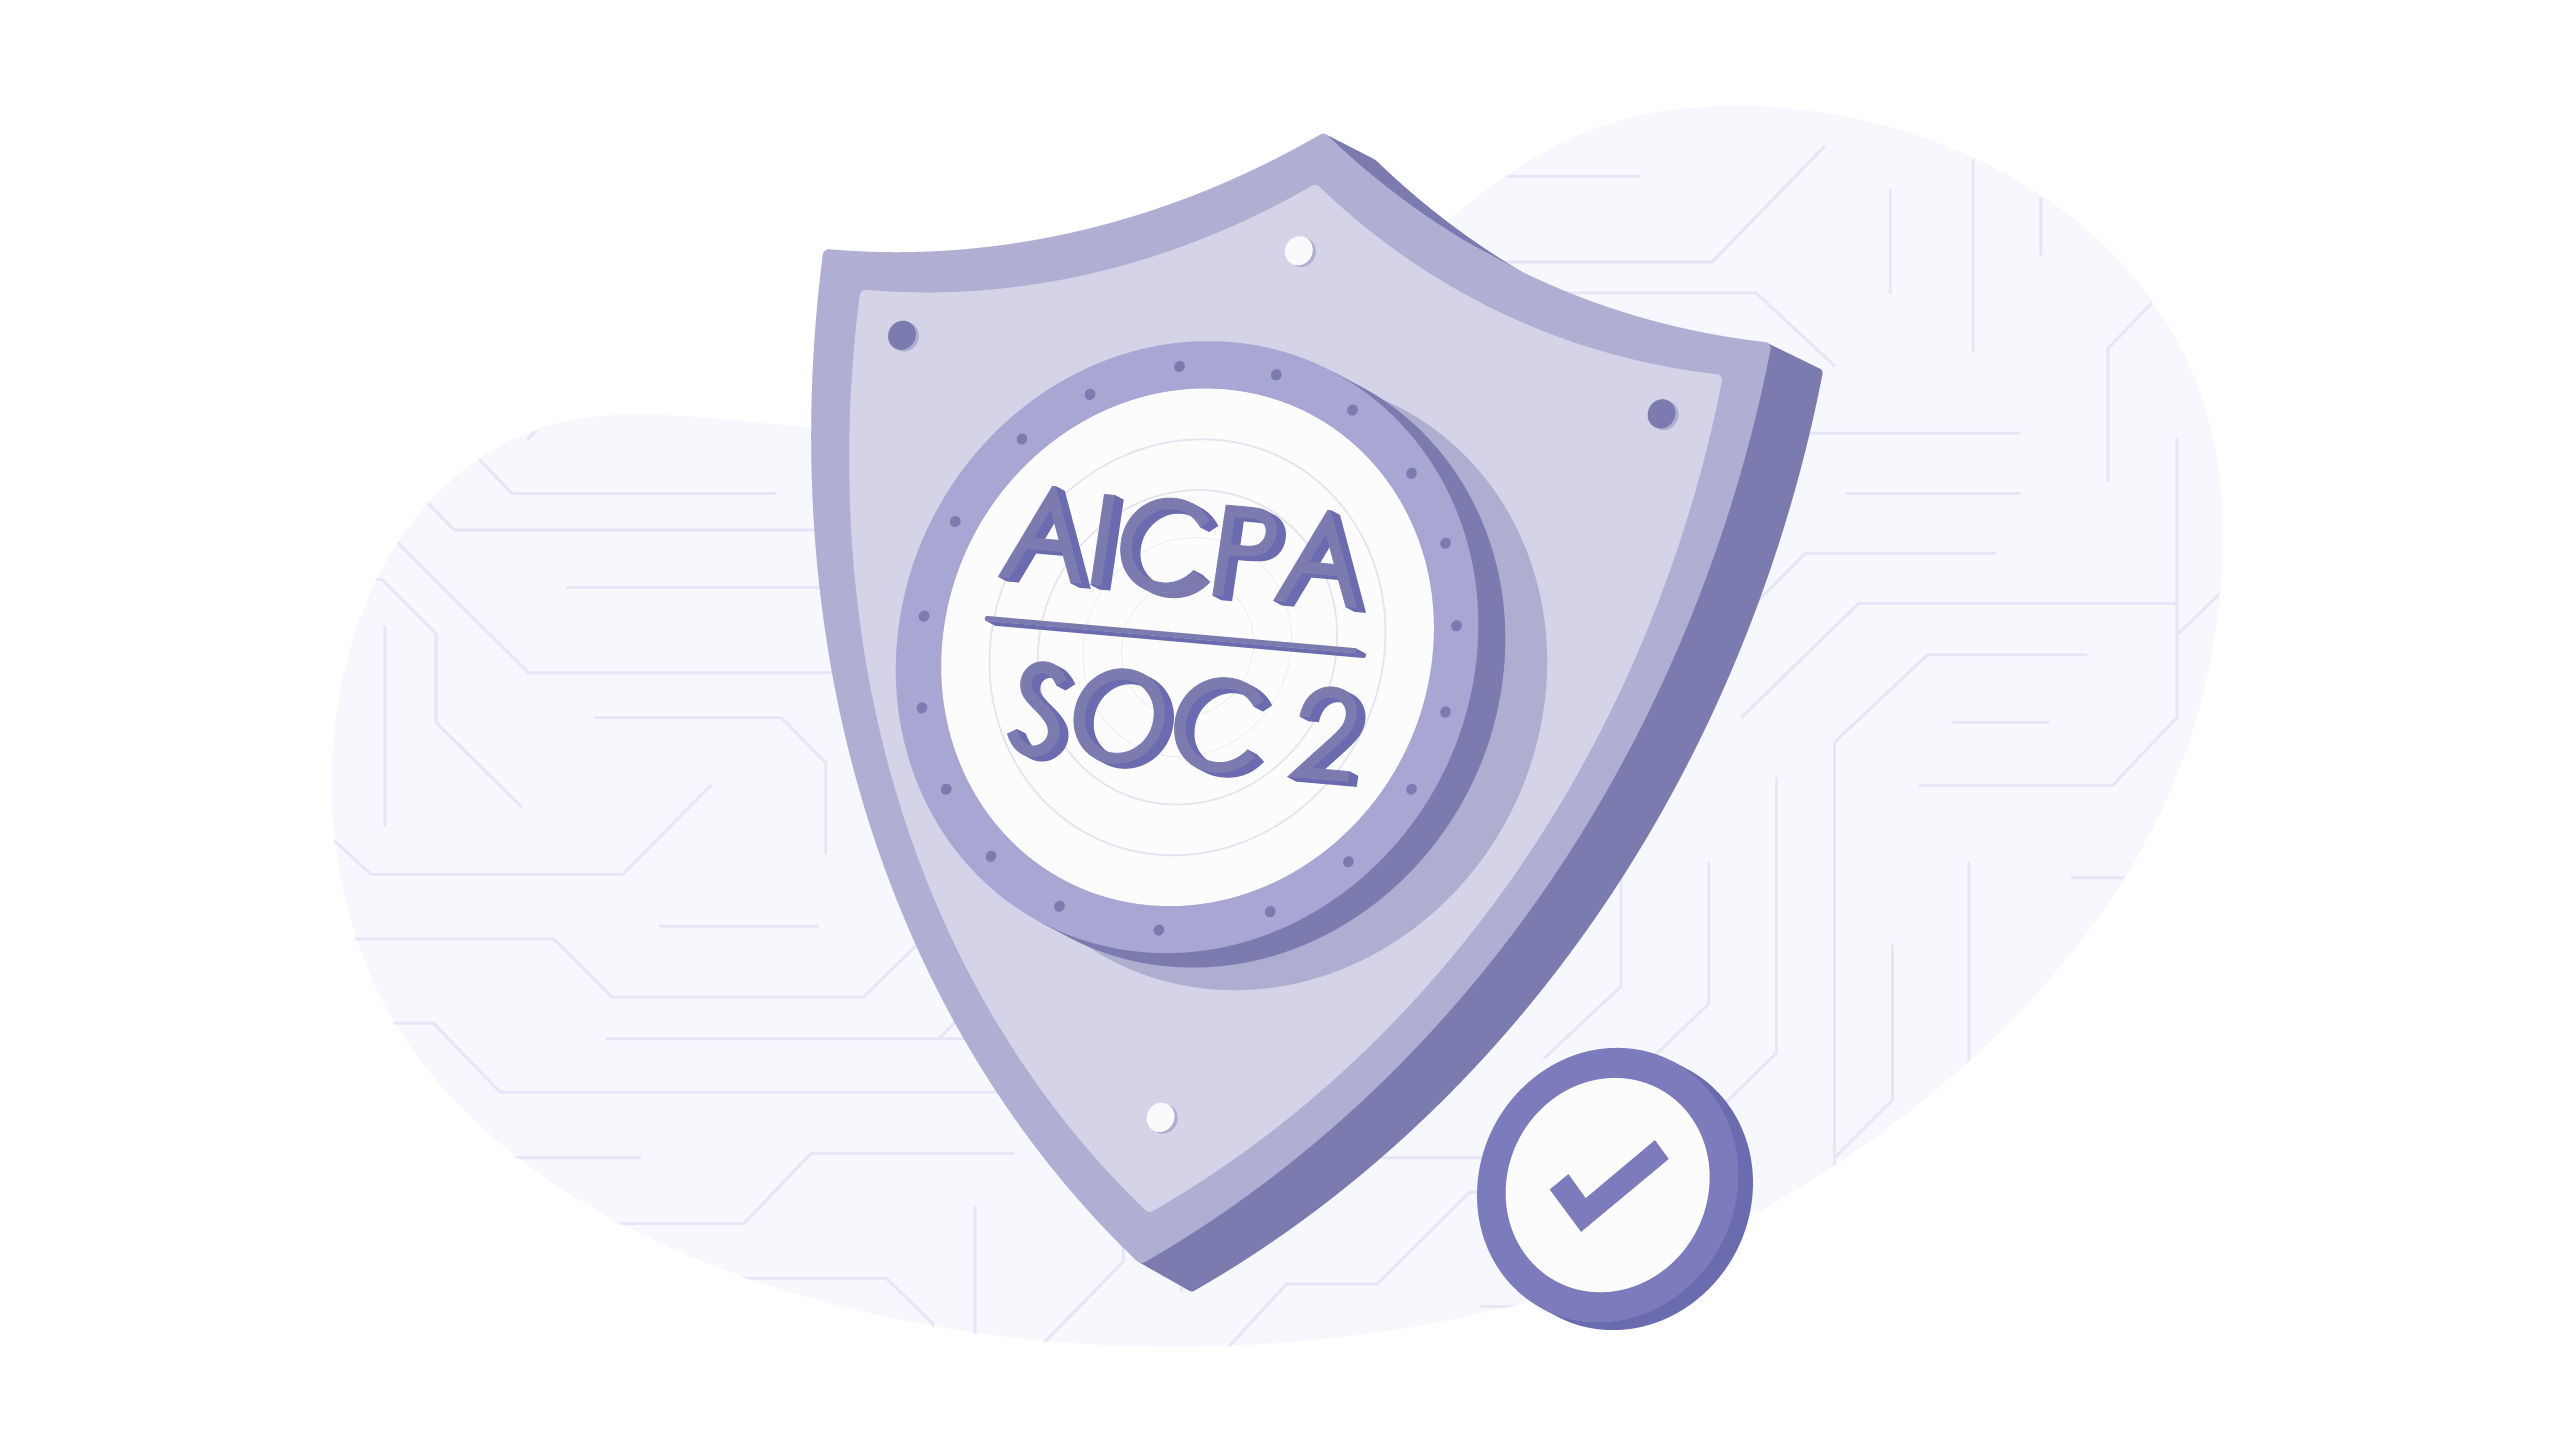 SOC 2 Certification Table Stakes for B2B SaaS